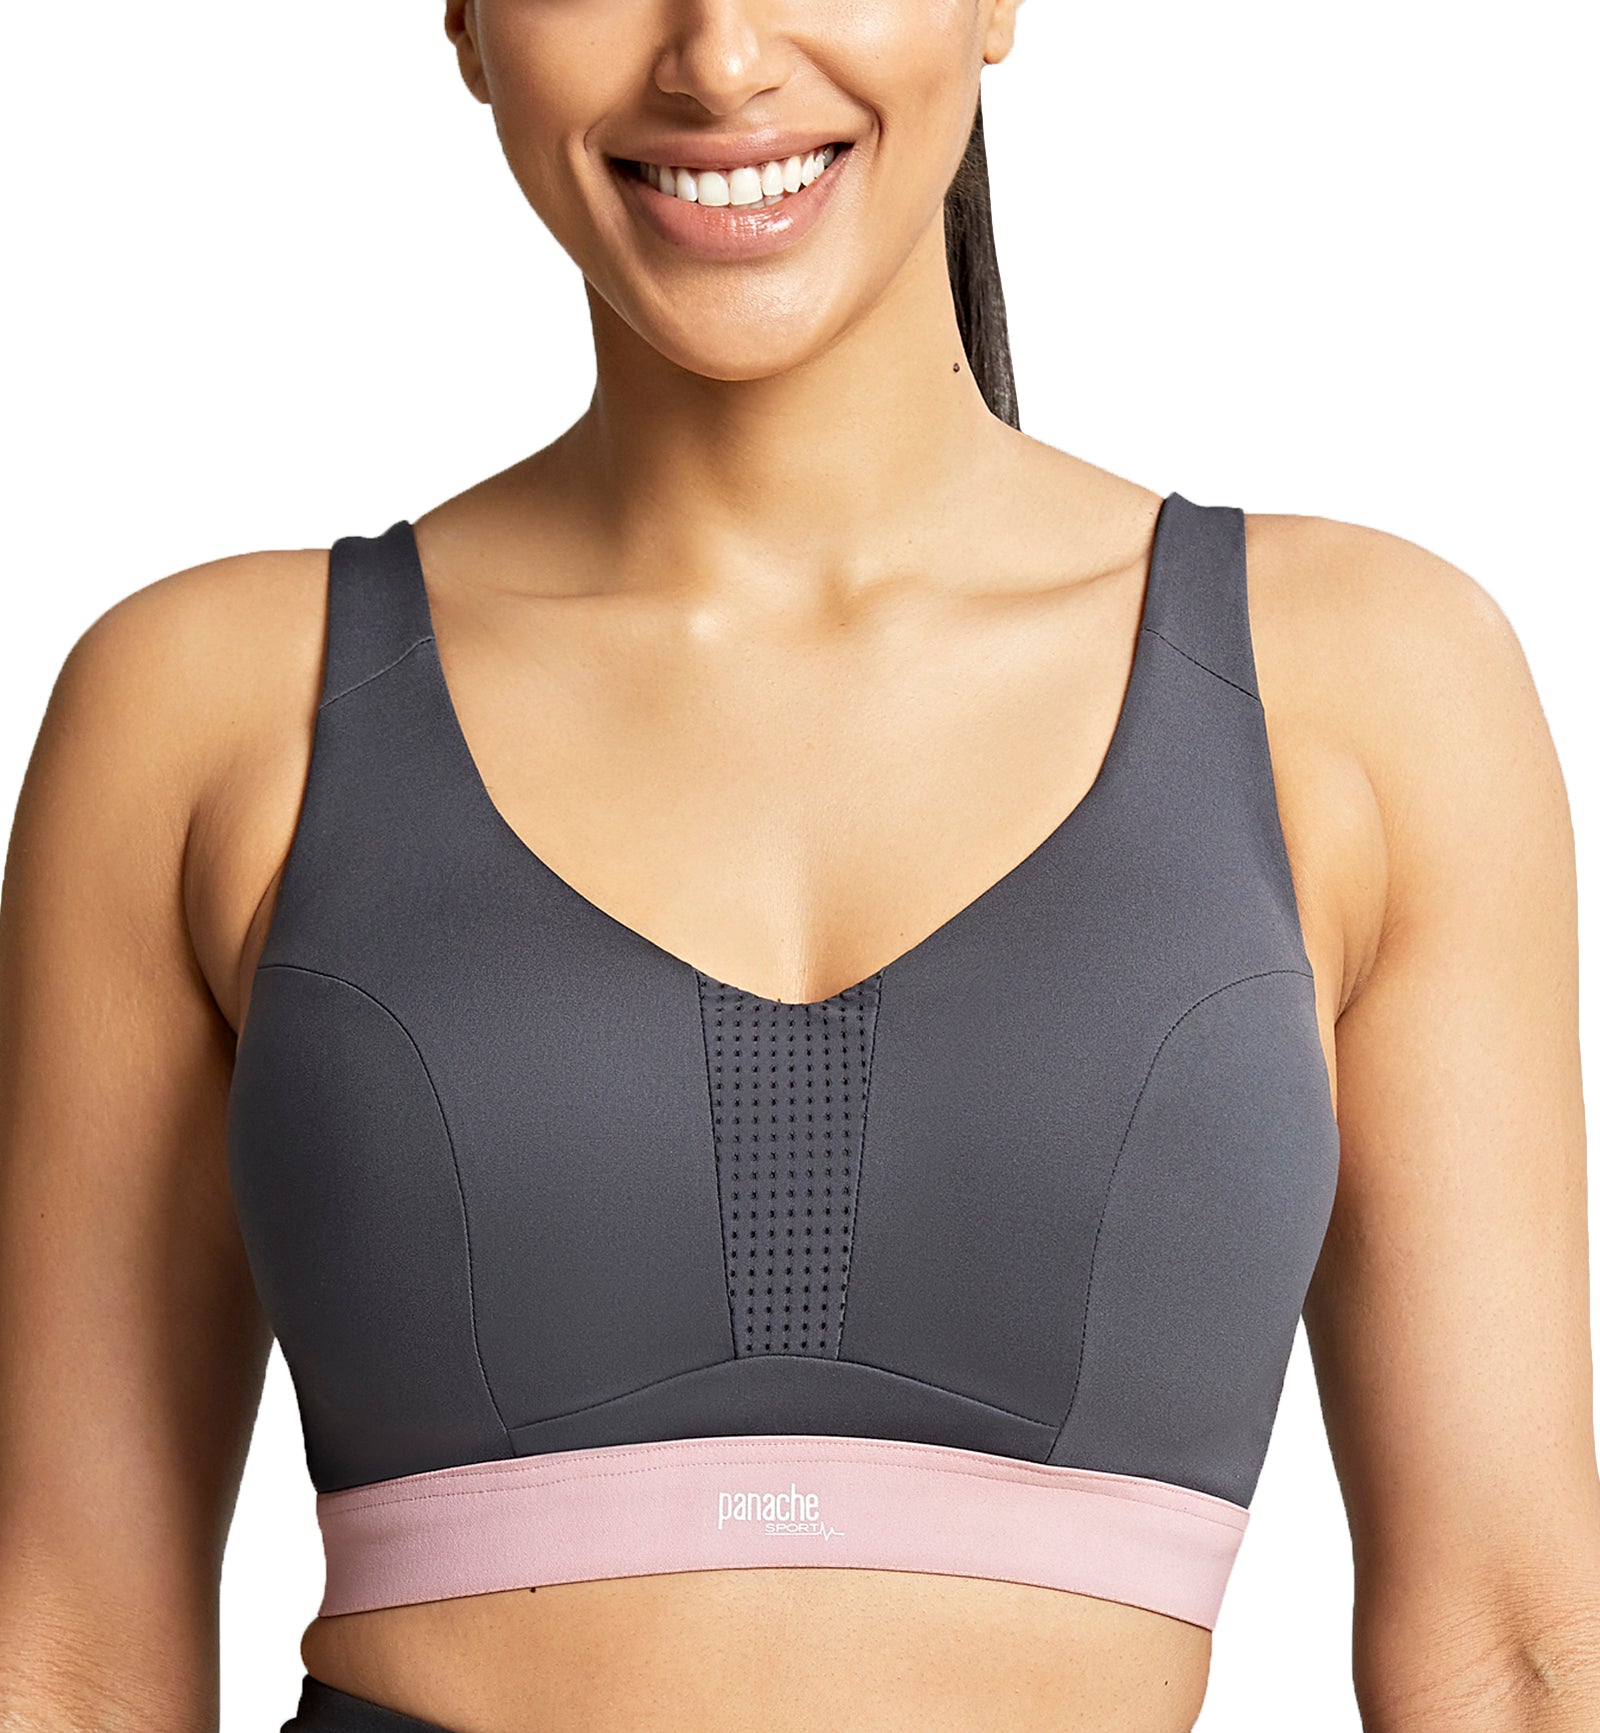 Panache Ultra Perform Non-padded Underwire Sports Bra (5022),28DD,Charcoal - Charcoal,28DD